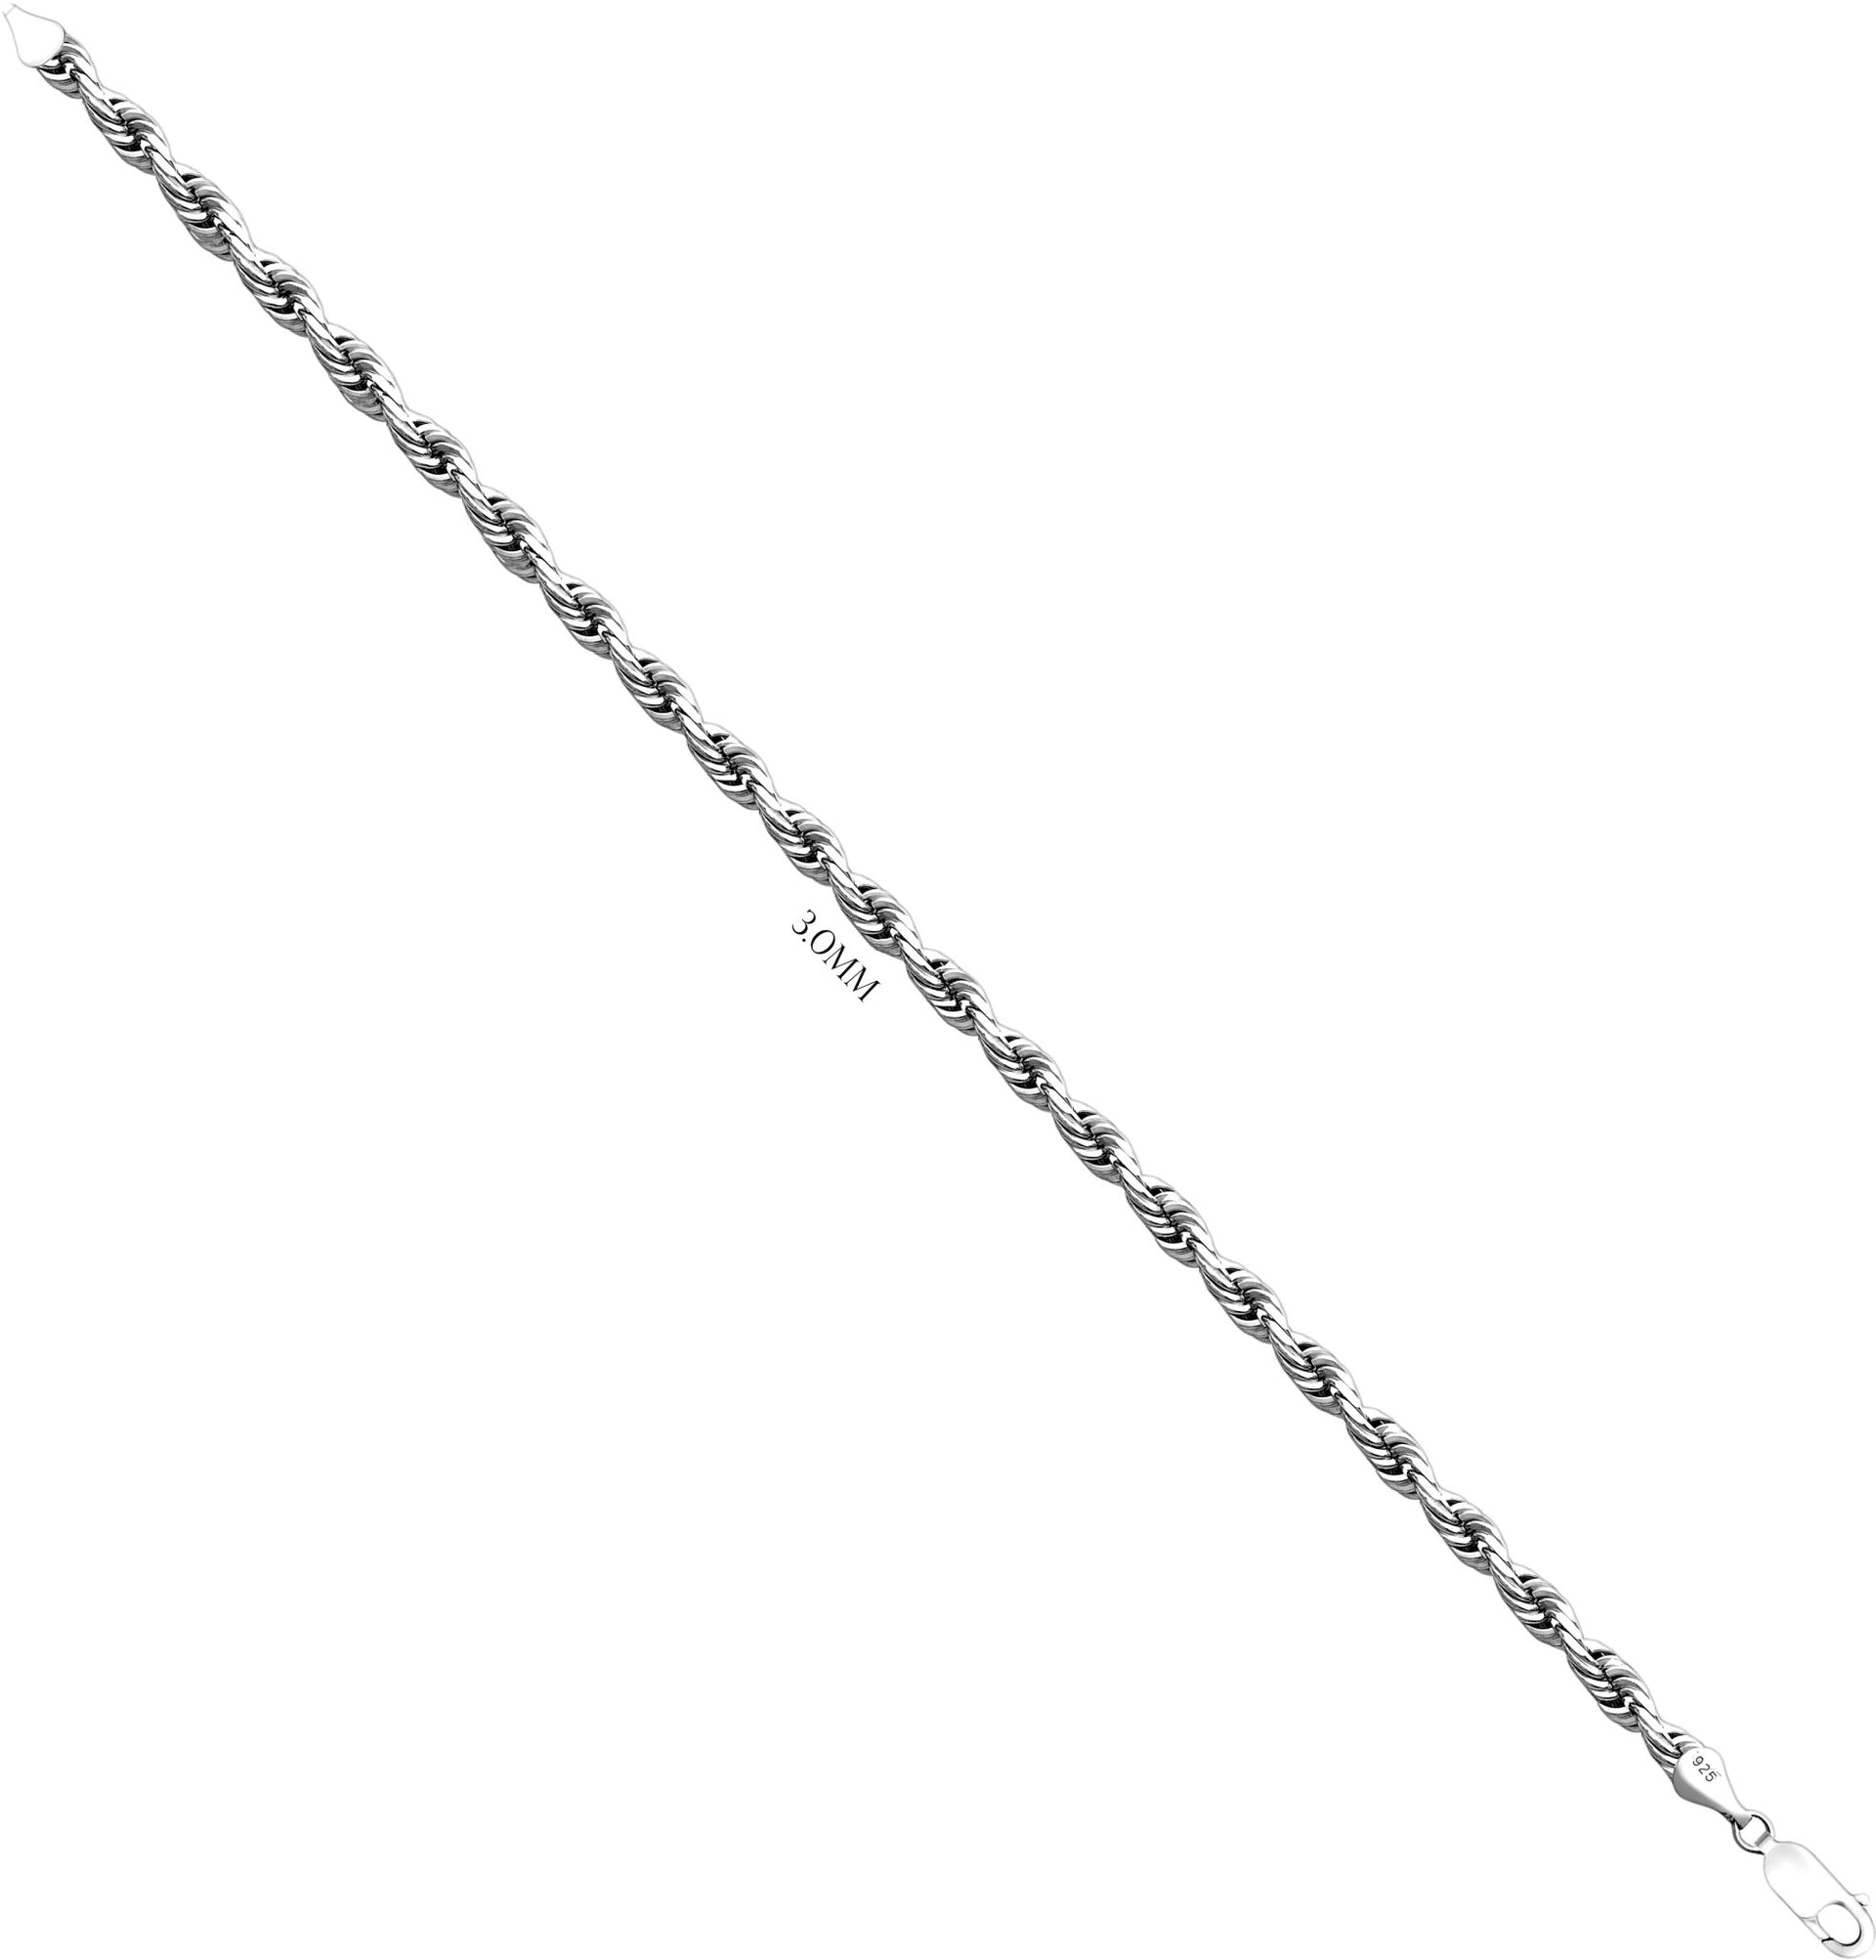 Solid 925 Sterling Silver Diamond Cut Rope Chain Necklace, Sizes 1.8mm - 5.2mm - US Jewels